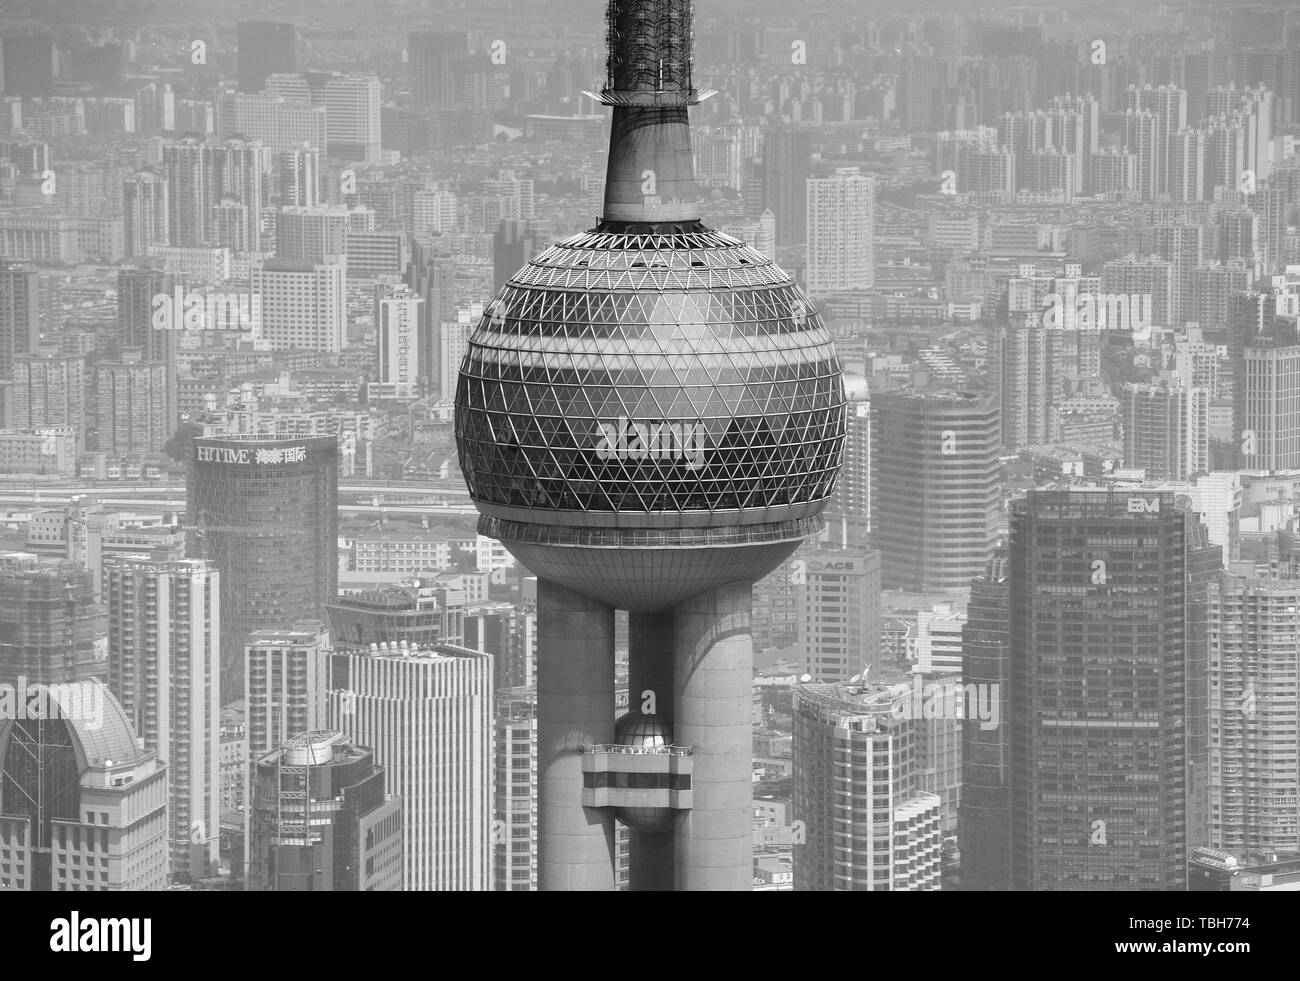 SHANGHAI, CHINA - MAY 28: Oriental Pearl Tower over river on May 28, 2012 in Shanghai, China. The tower was the tallest structure in China excluding Taiwan from 1994–2007 and the landmark of Shanghai. Stock Photo